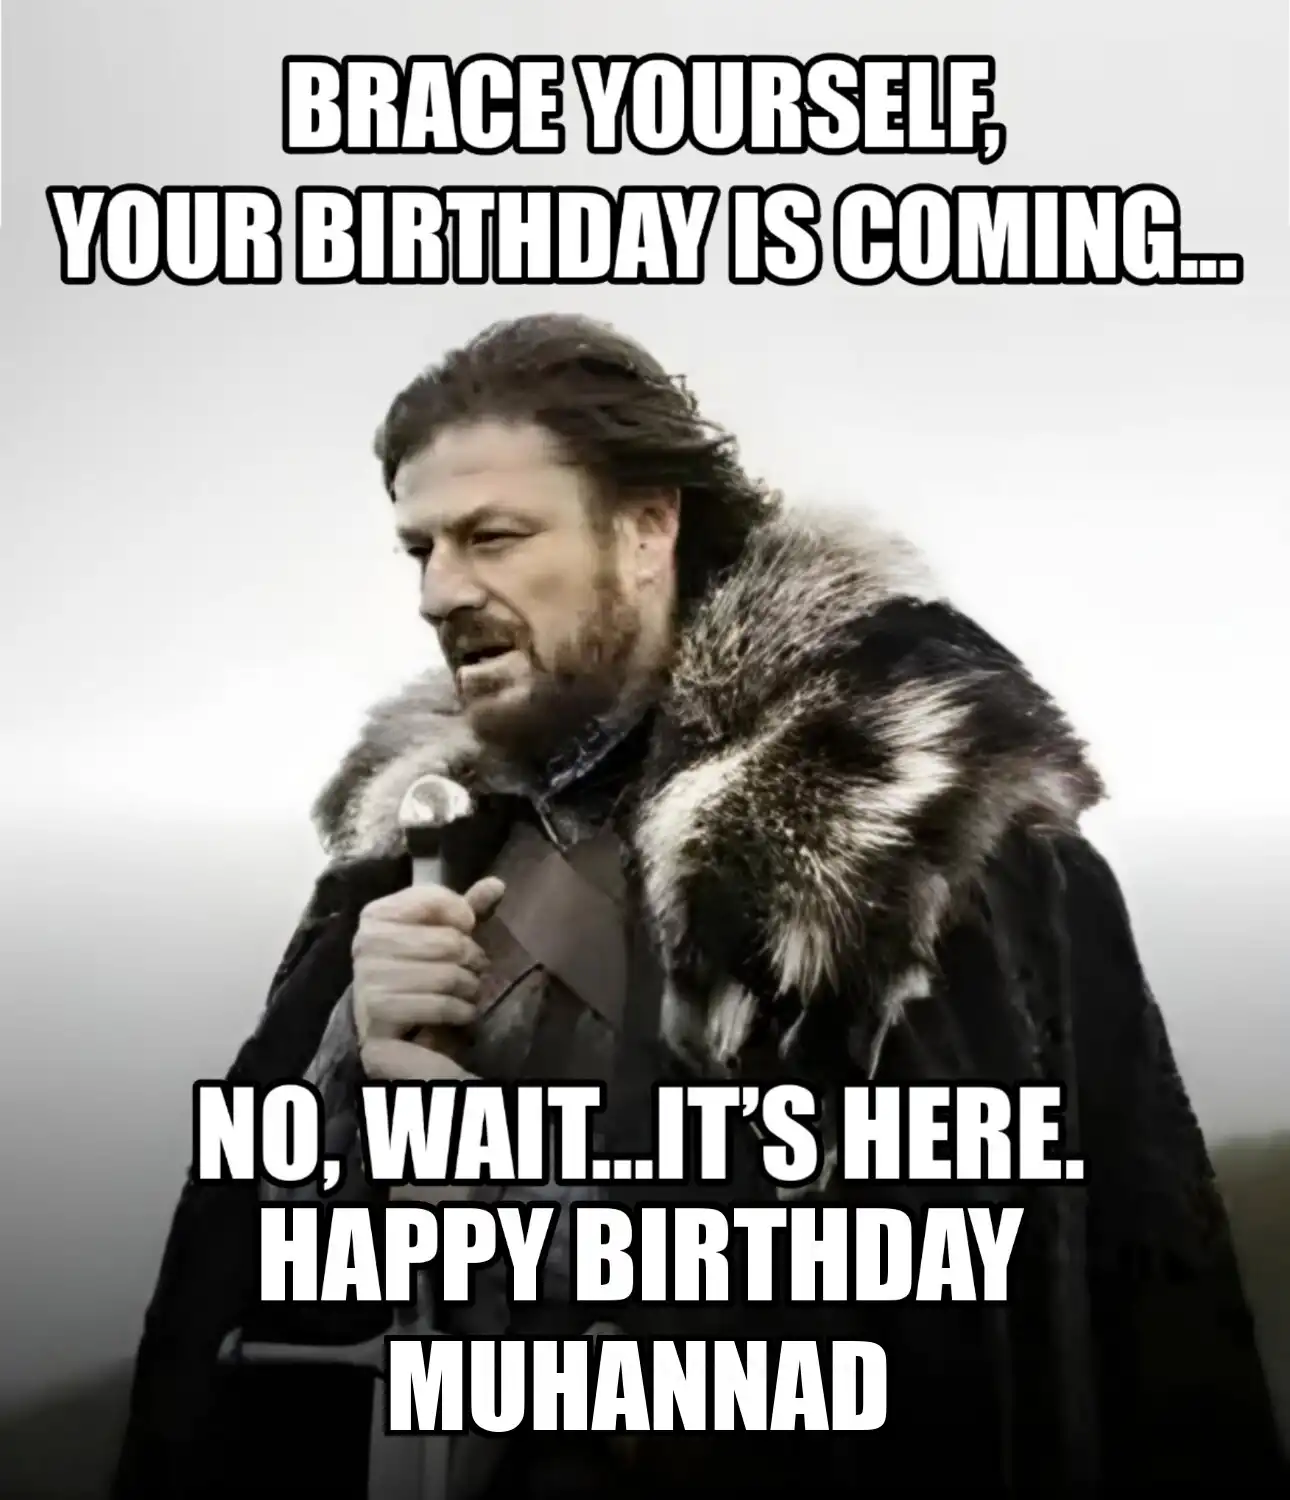 Happy Birthday Muhannad Brace Yourself Your Birthday Is Coming Meme